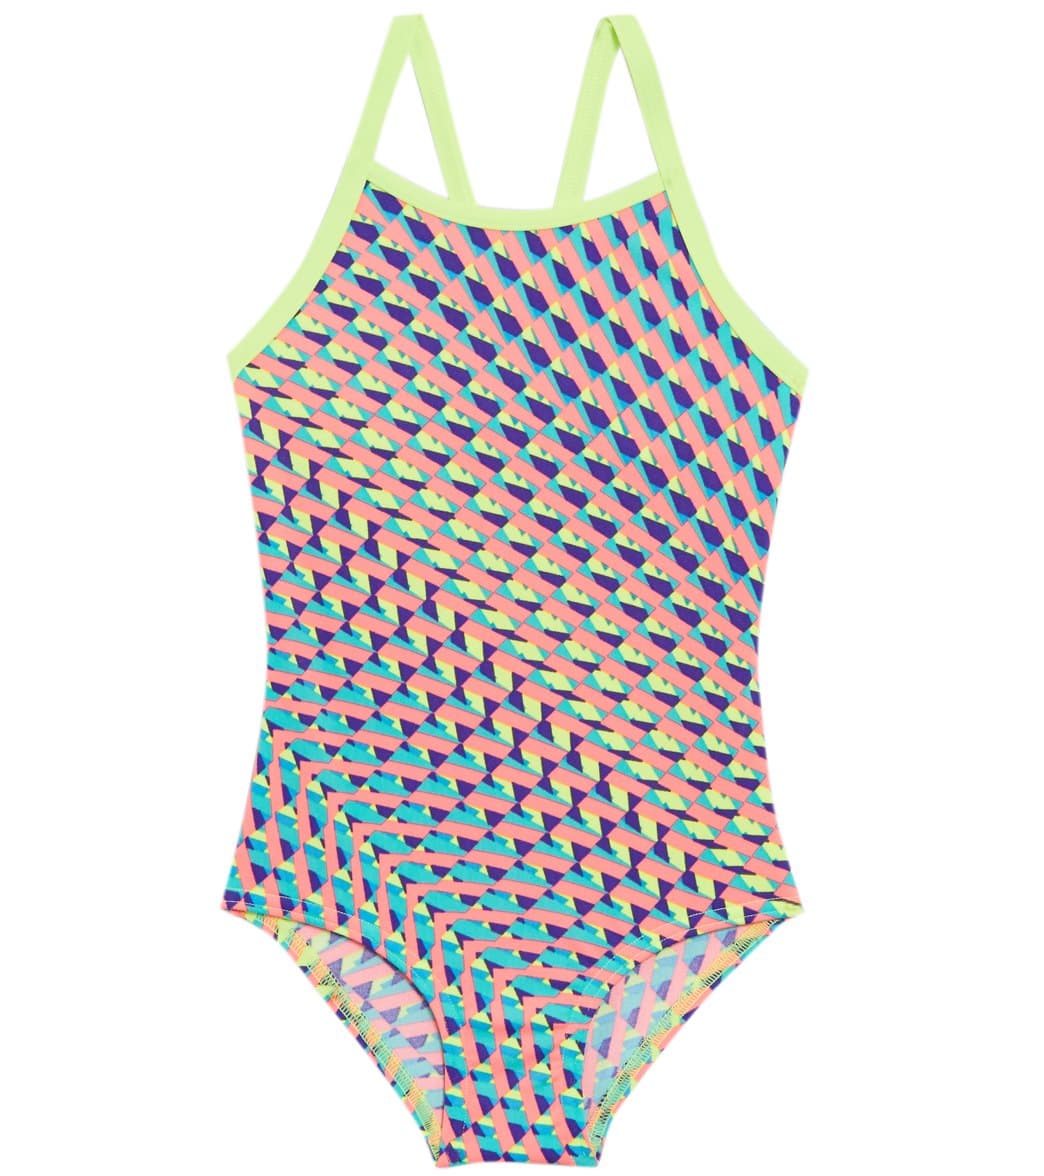 Funkita Toddler Girls Glitter Girl One Piece Swimsuit - Multi Pink 1T Polyester - Swimoutlet.com